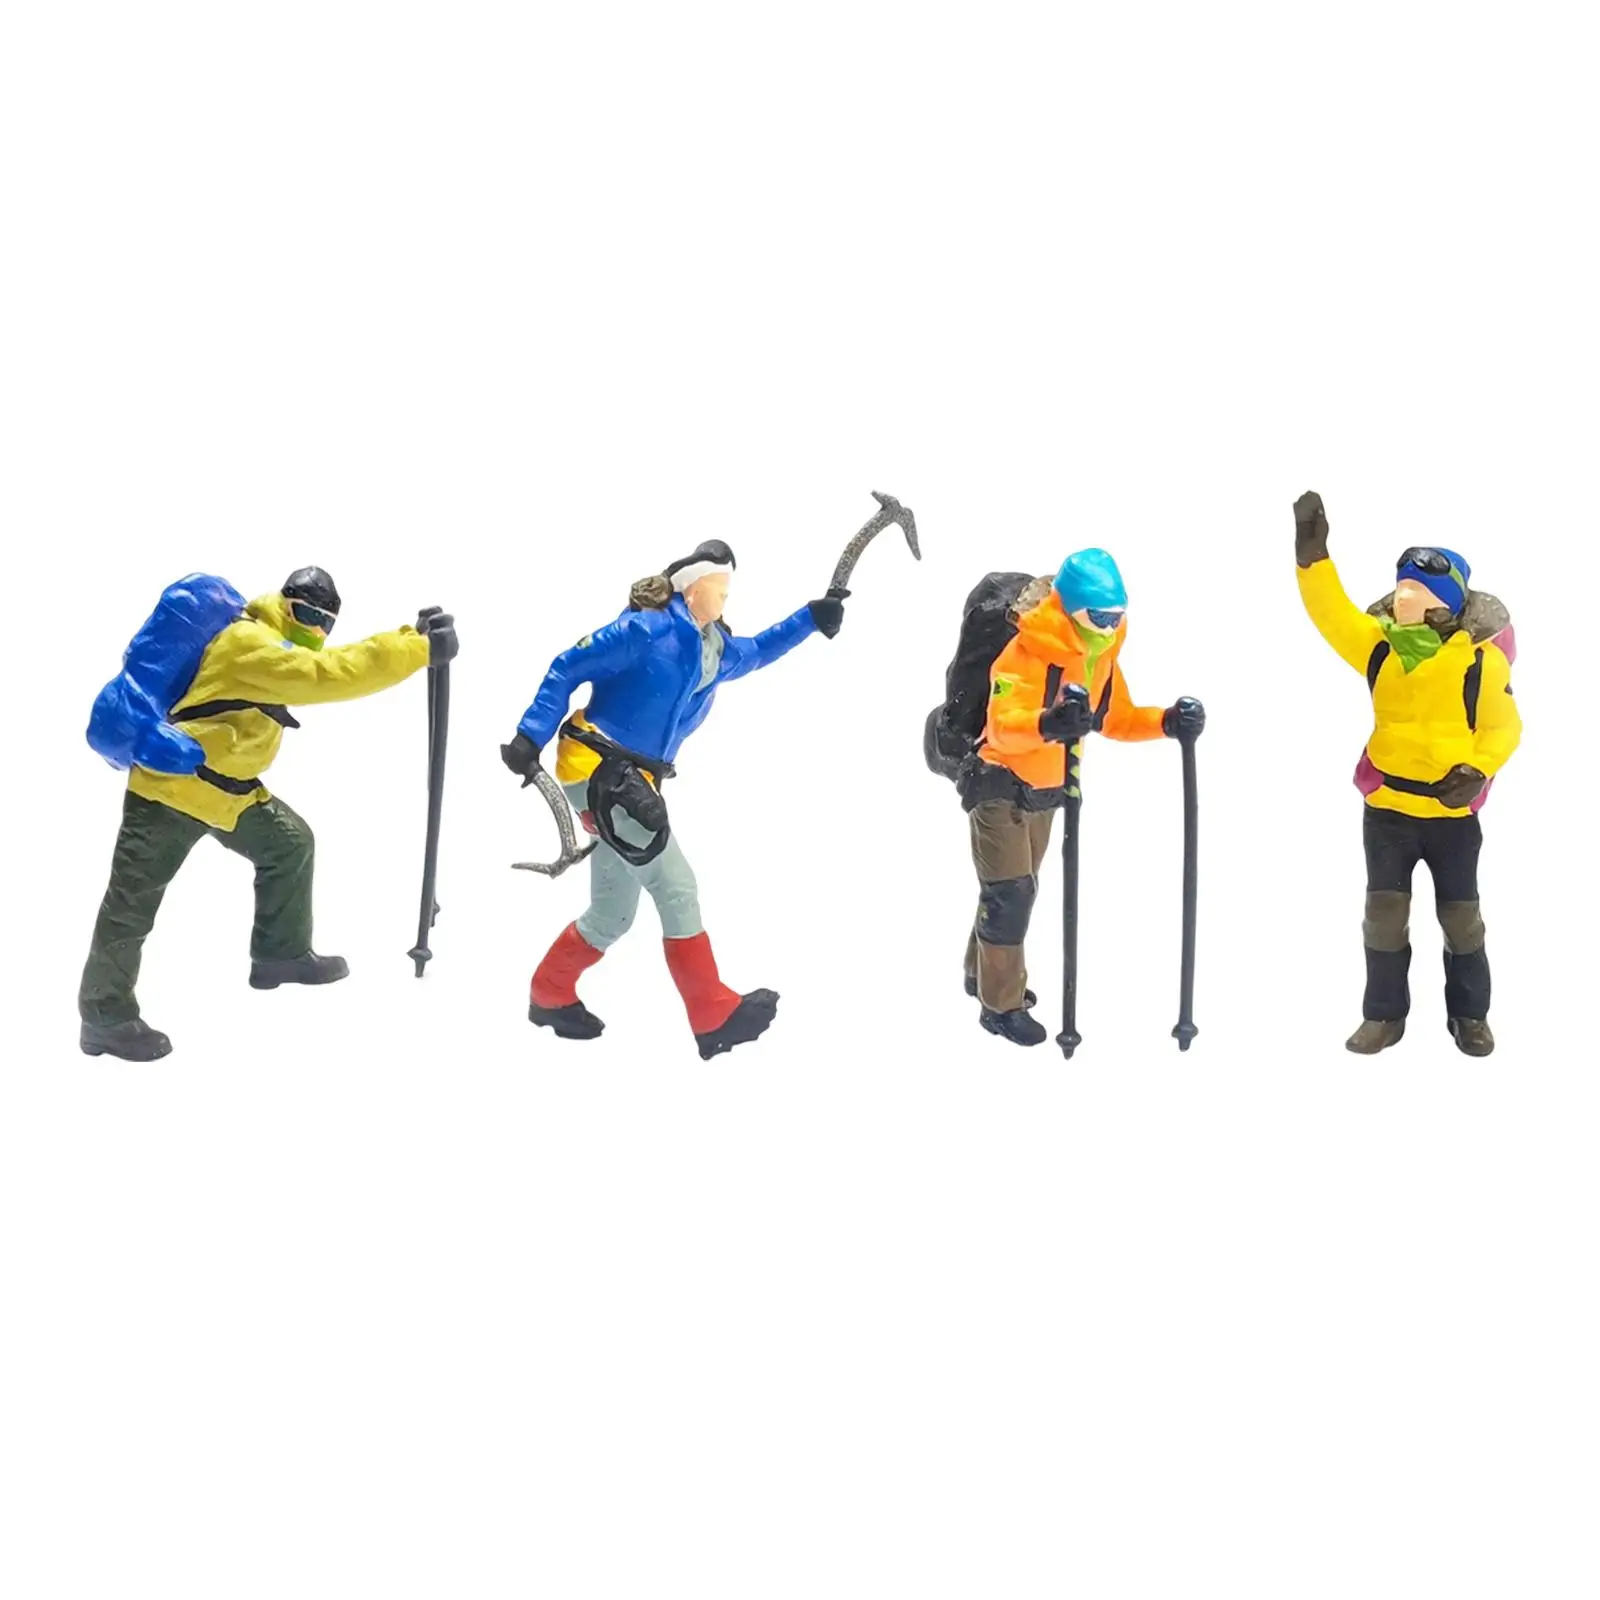 Resin 1/87 Climbing People Figures Mini People Model Mountaineering People Figures for DIY Projects Miniature Scene Layout Decor